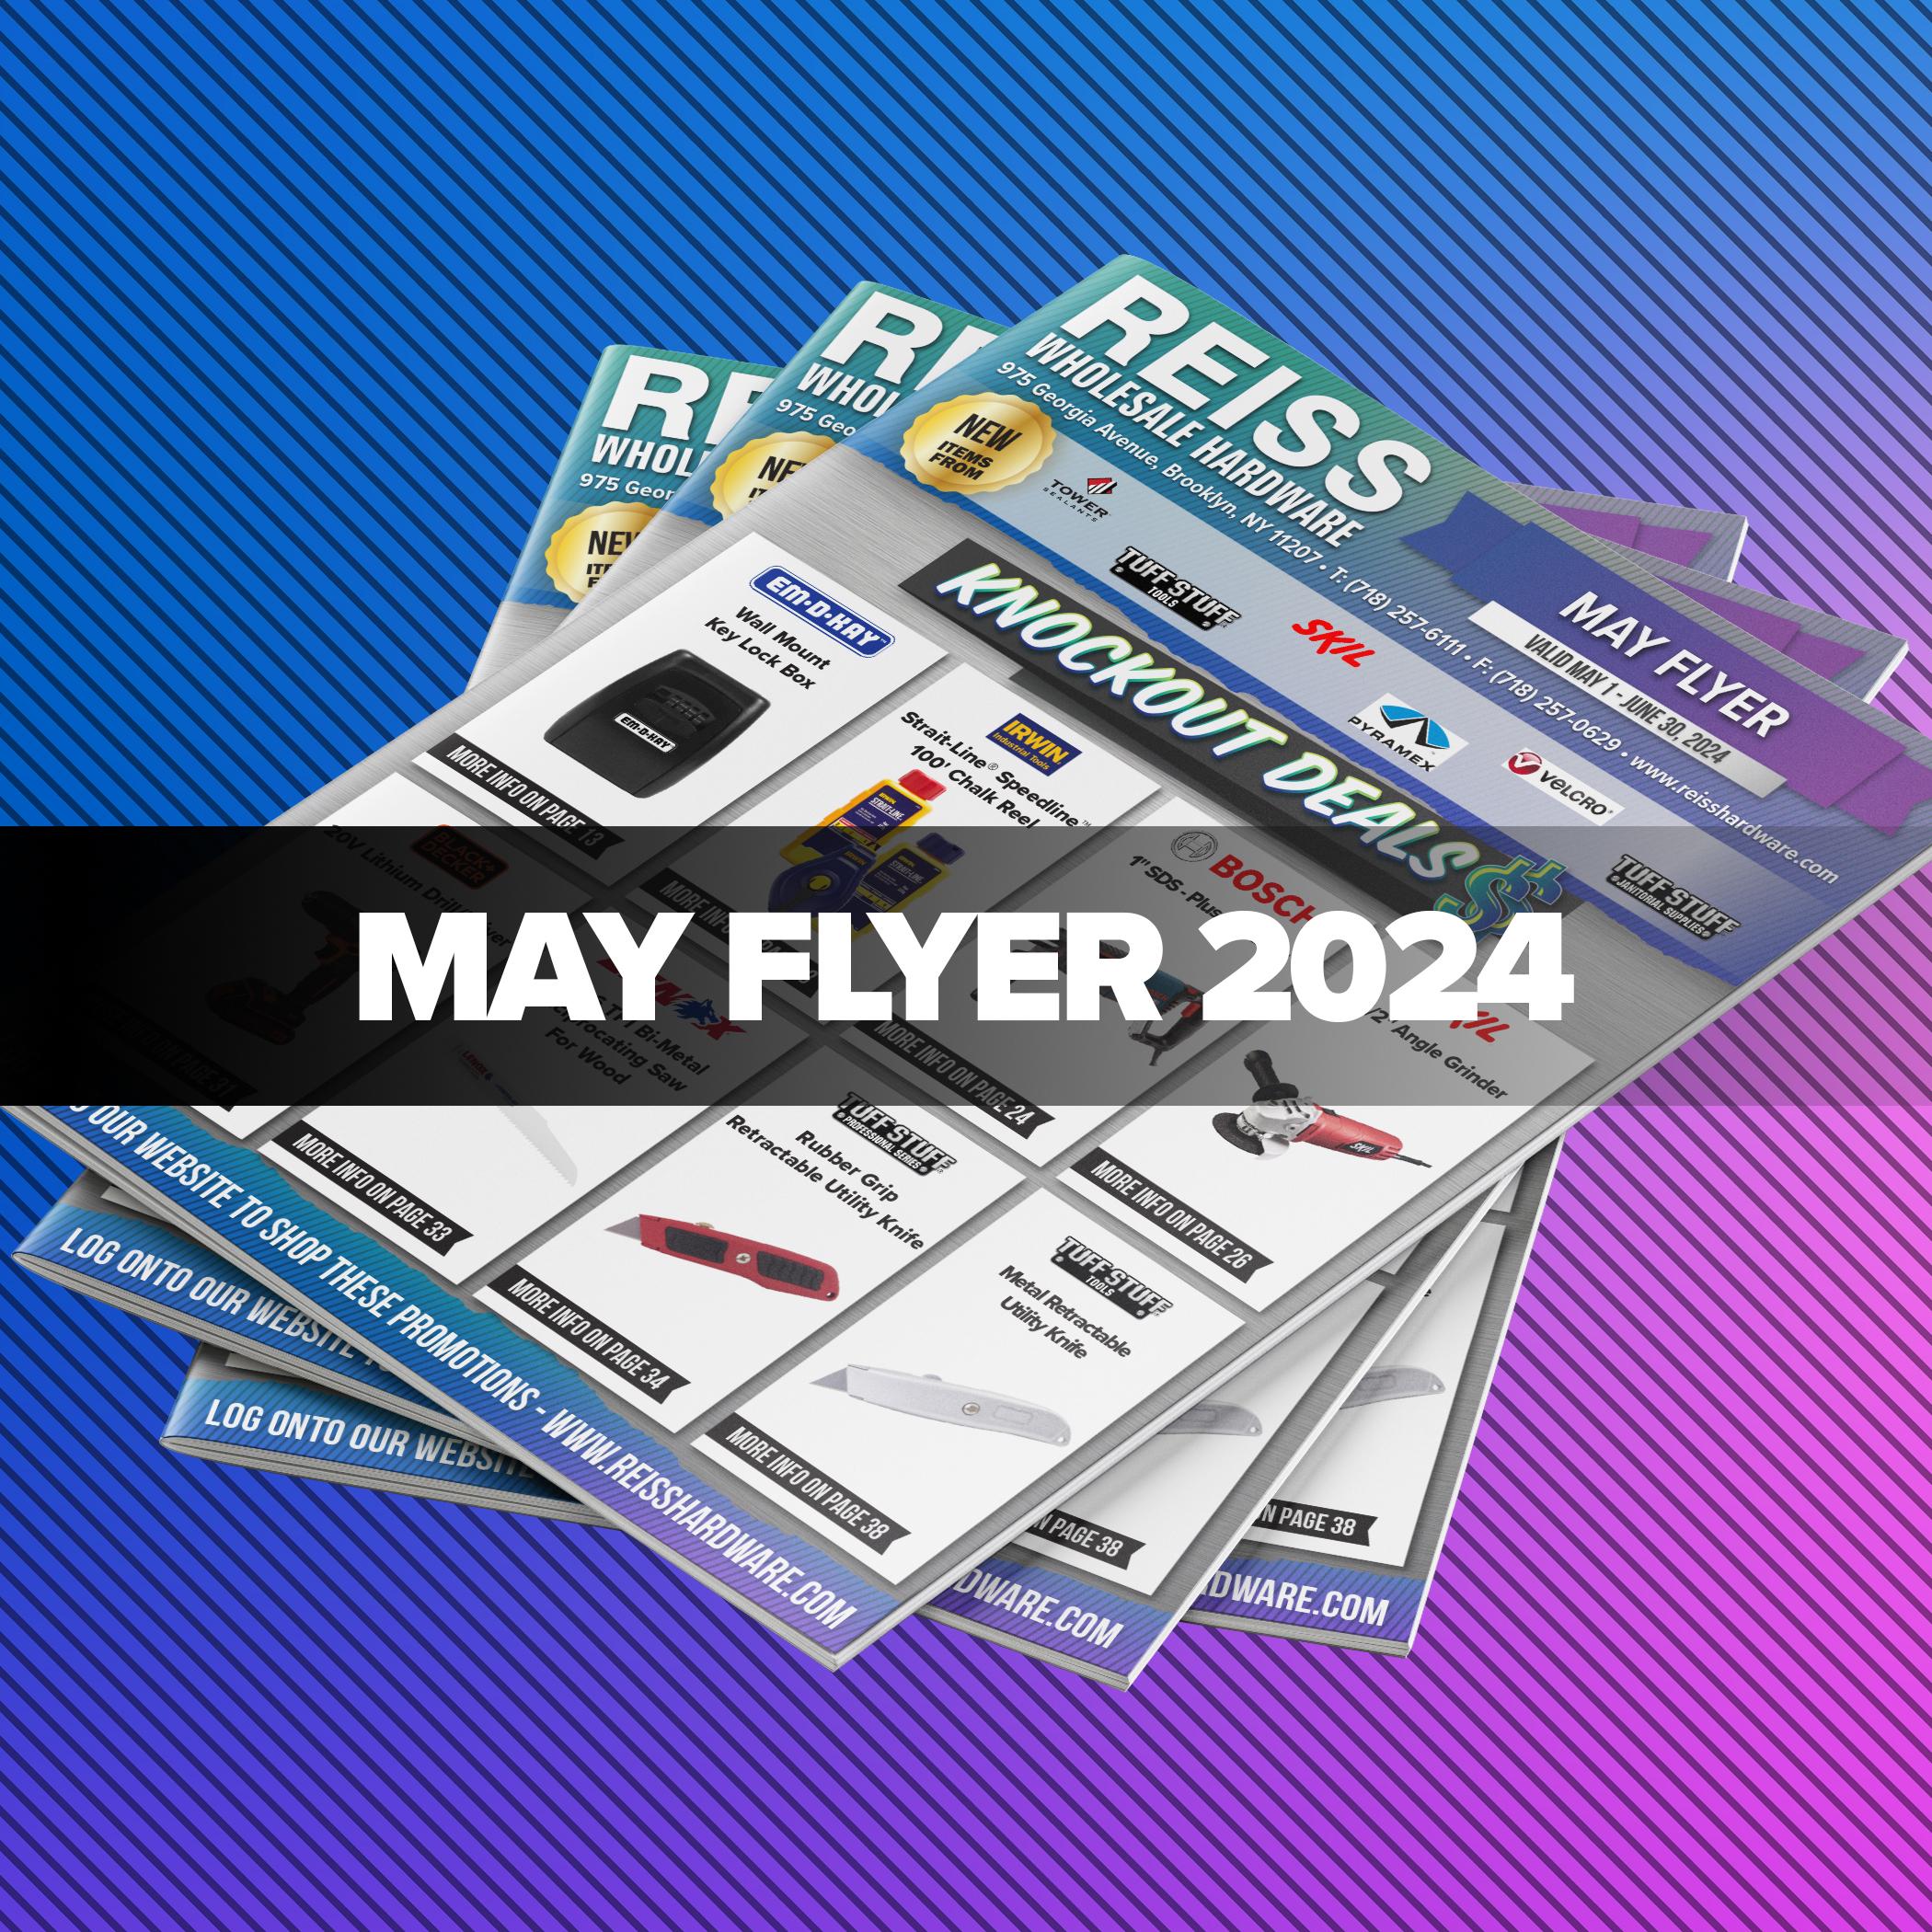 May Flyer 2024